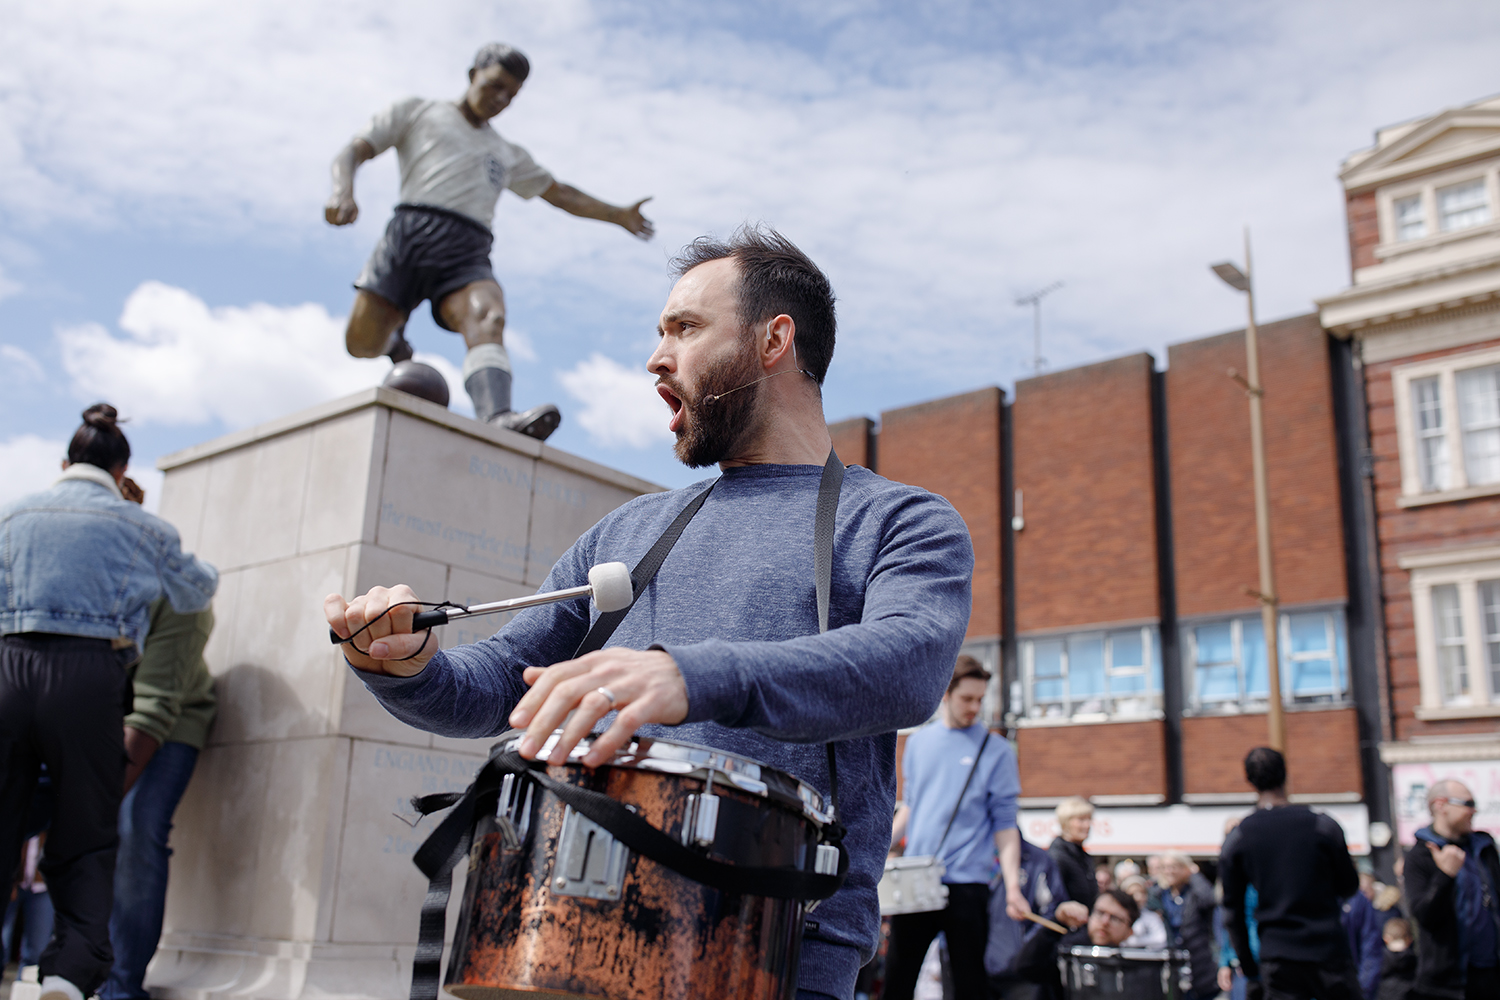 Drummer at the passion play in front of a statue of Duncan Edwards in Dudley town centre